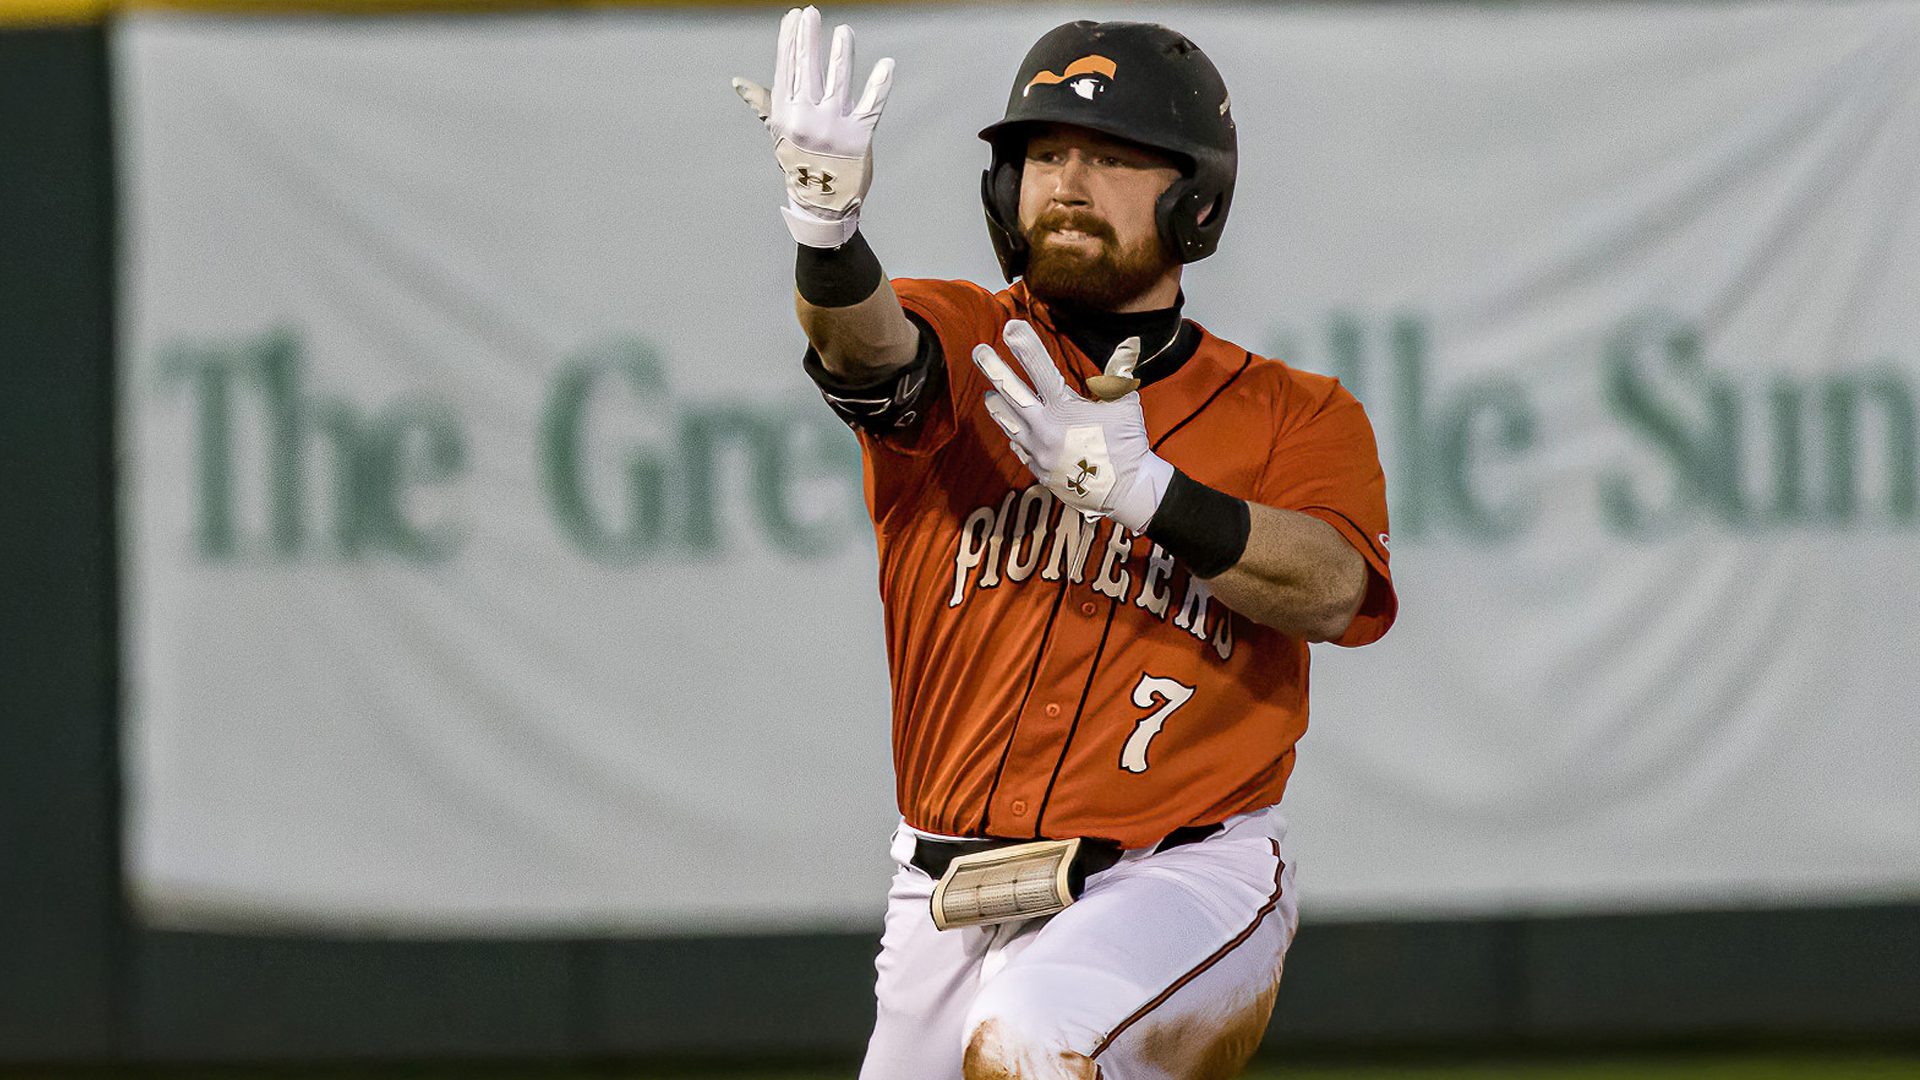 Samuelson homers twice in 9-4 road win at Emory & Henry